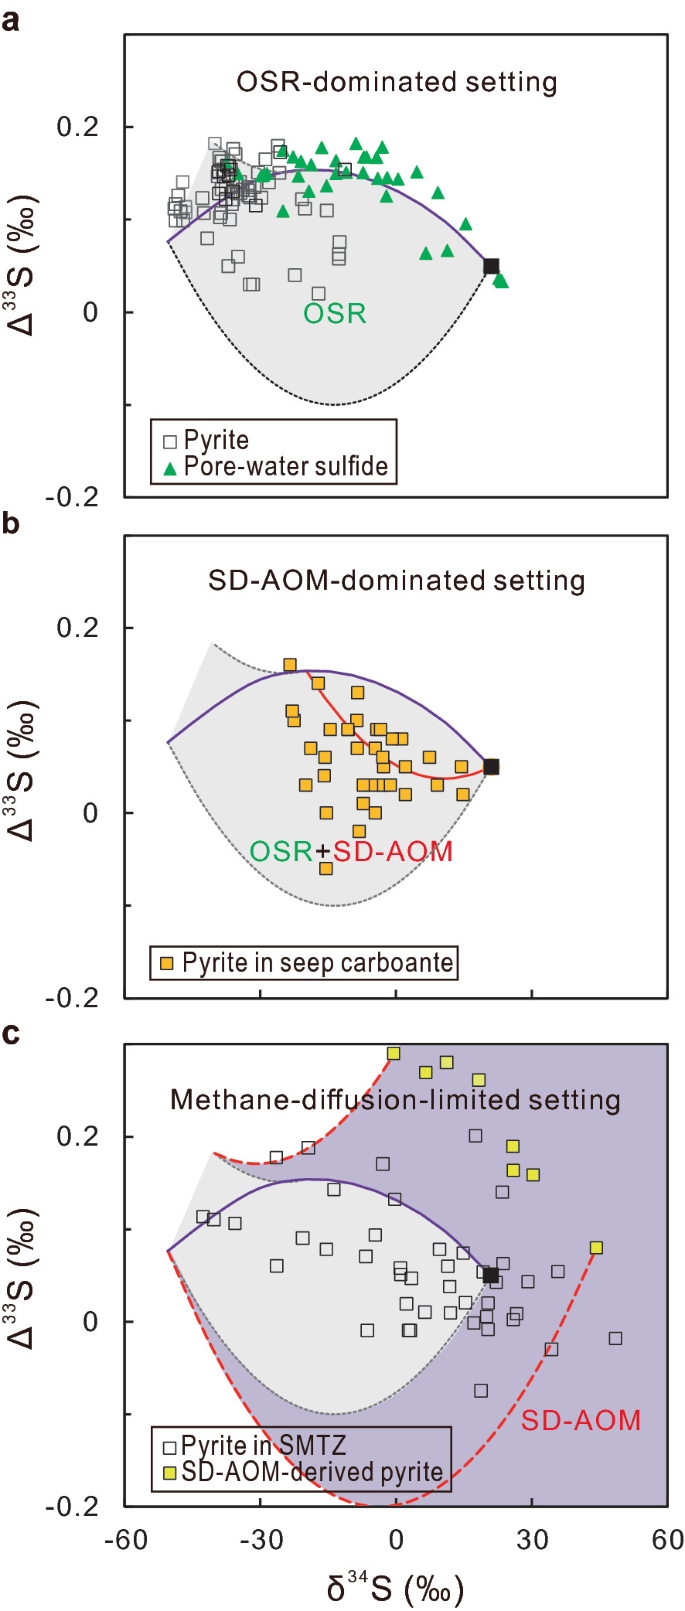 A set of three scatterplots, a to c, for uppercase delta 33 S versus lowercase delta 34 S. A is for O S R-dominated setting. The data is for pore-water sulfate and pyrite. B is for S D-A O M-dominated setting with data for pyrite in seep carbonate. C is for Methane-diffusion-limited setting with data for pyrite in S M T Z and S D-A O M-derived pyrite. The trend for all graphs is fluctuating.